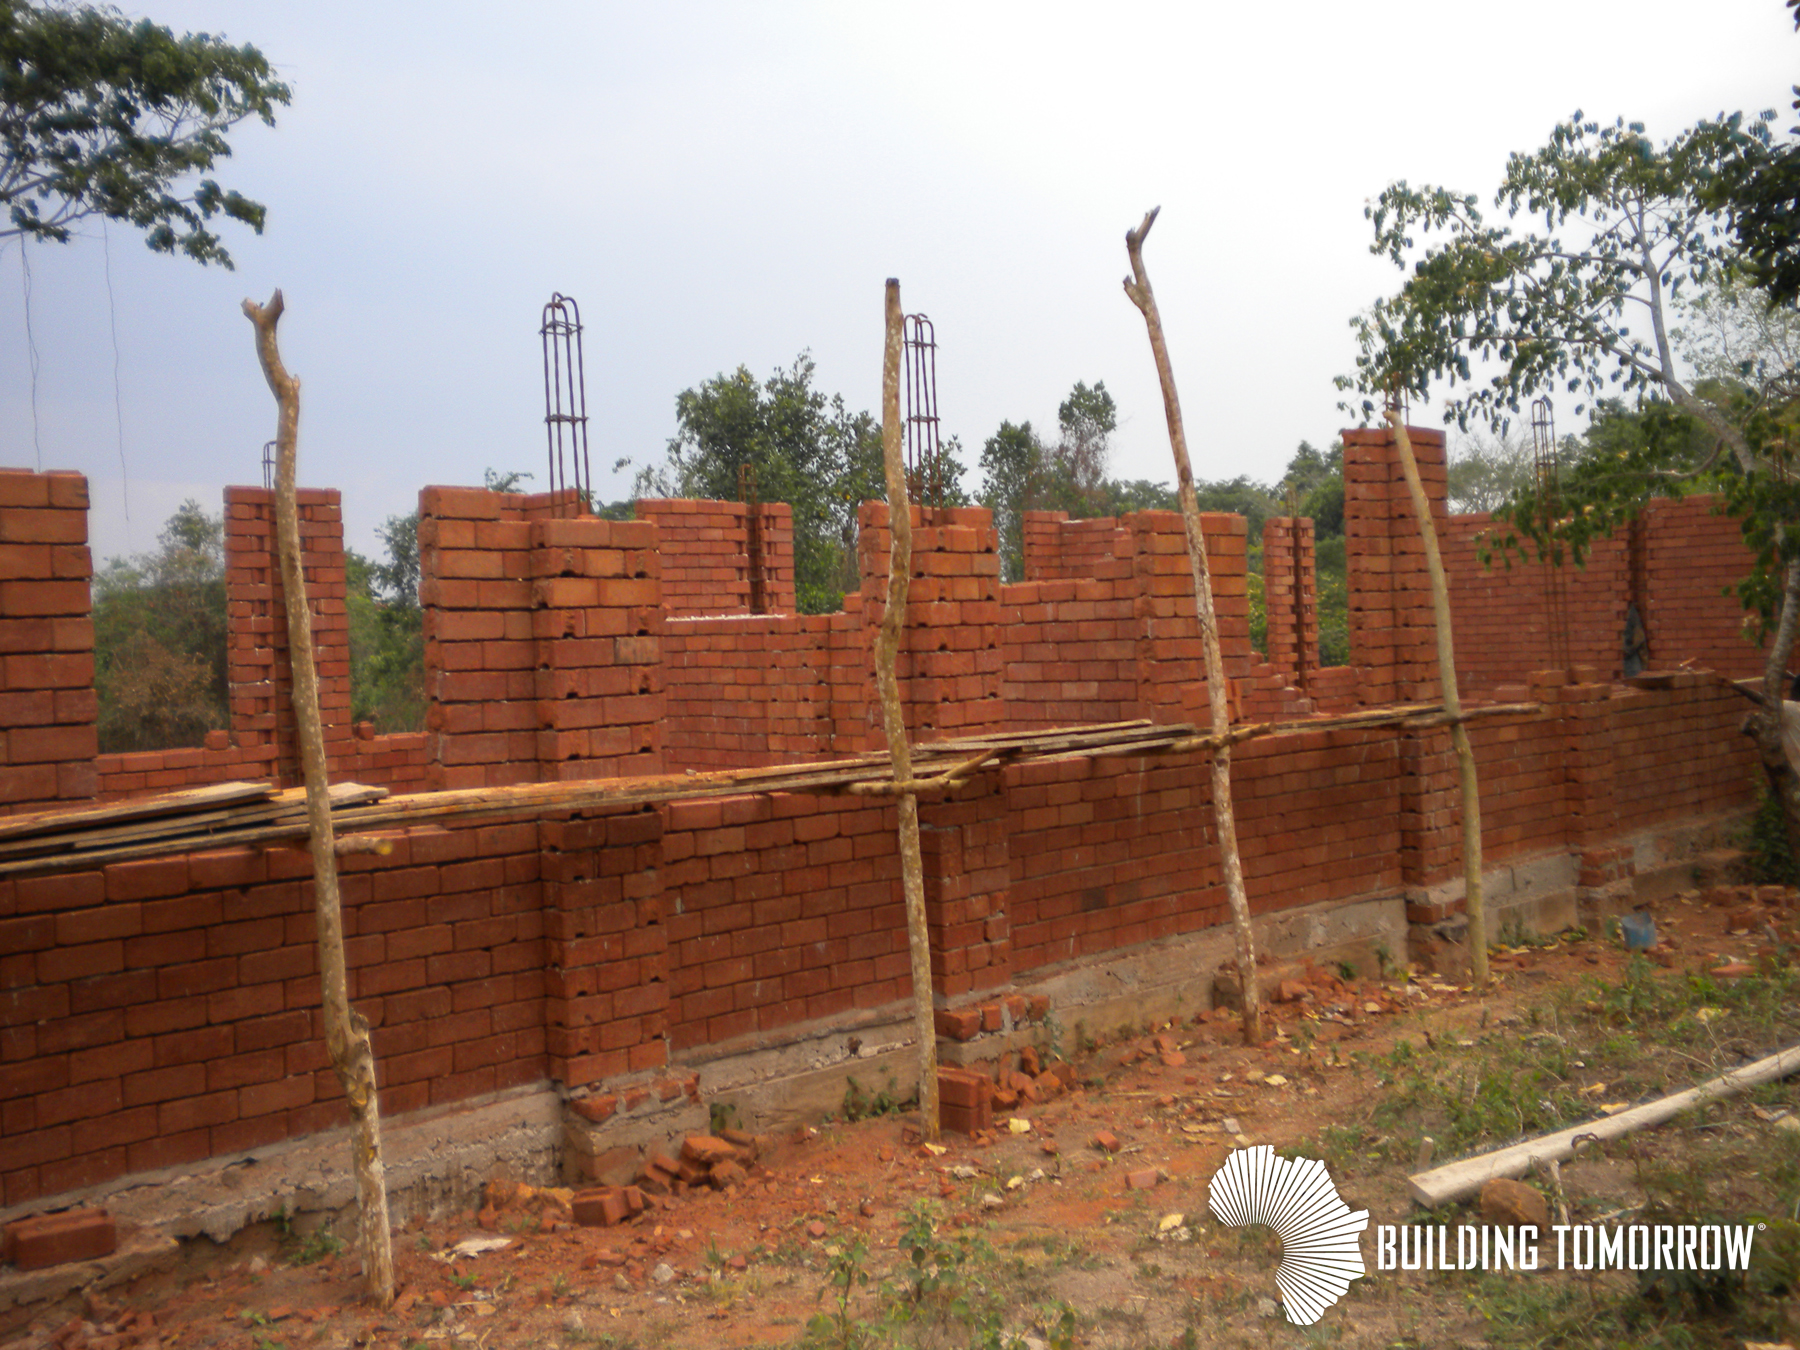 (taken Feb 10, 2011) Construction continues at the BT Academy of Kyeitabya, supported by the University of Notre Dame School of Architecture.